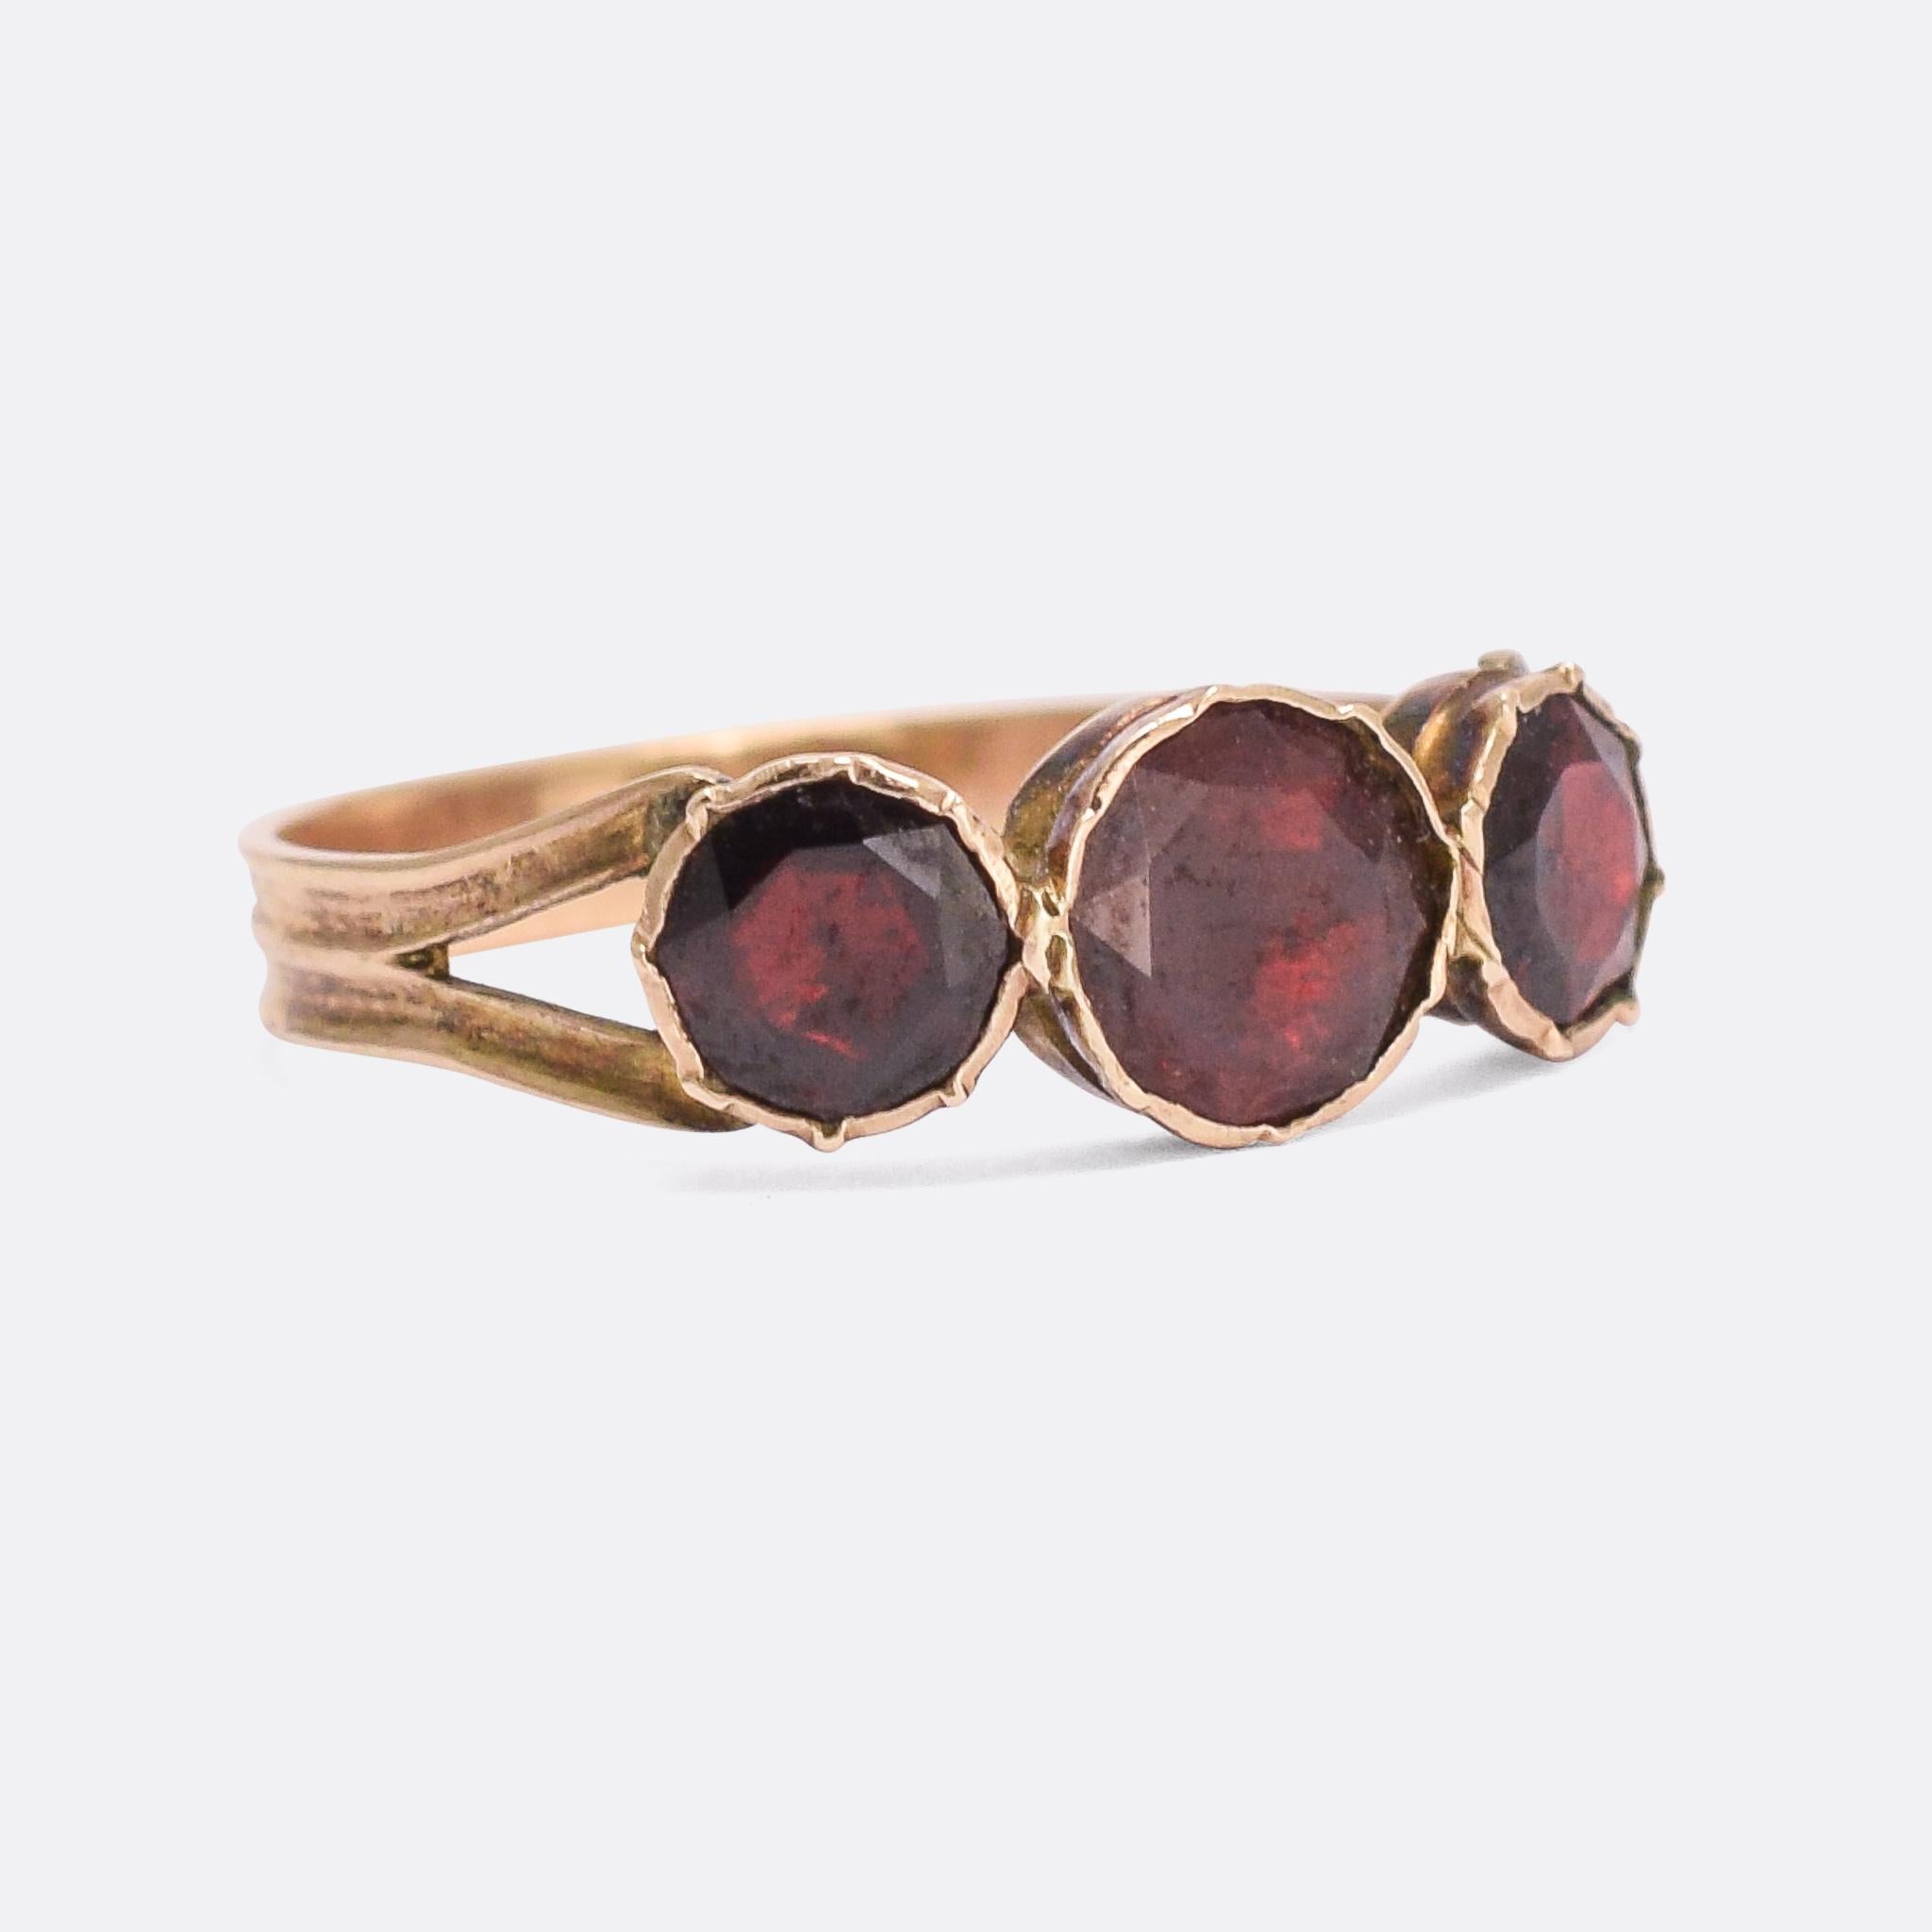 The stunning Georgian three-stone ring is set with foil-backed flat cut garnets and dates from the very early 19th Century. It's crafted in 9 karat rose gold, with simple split shoulders and a reeded band. The stones display great vibrance and